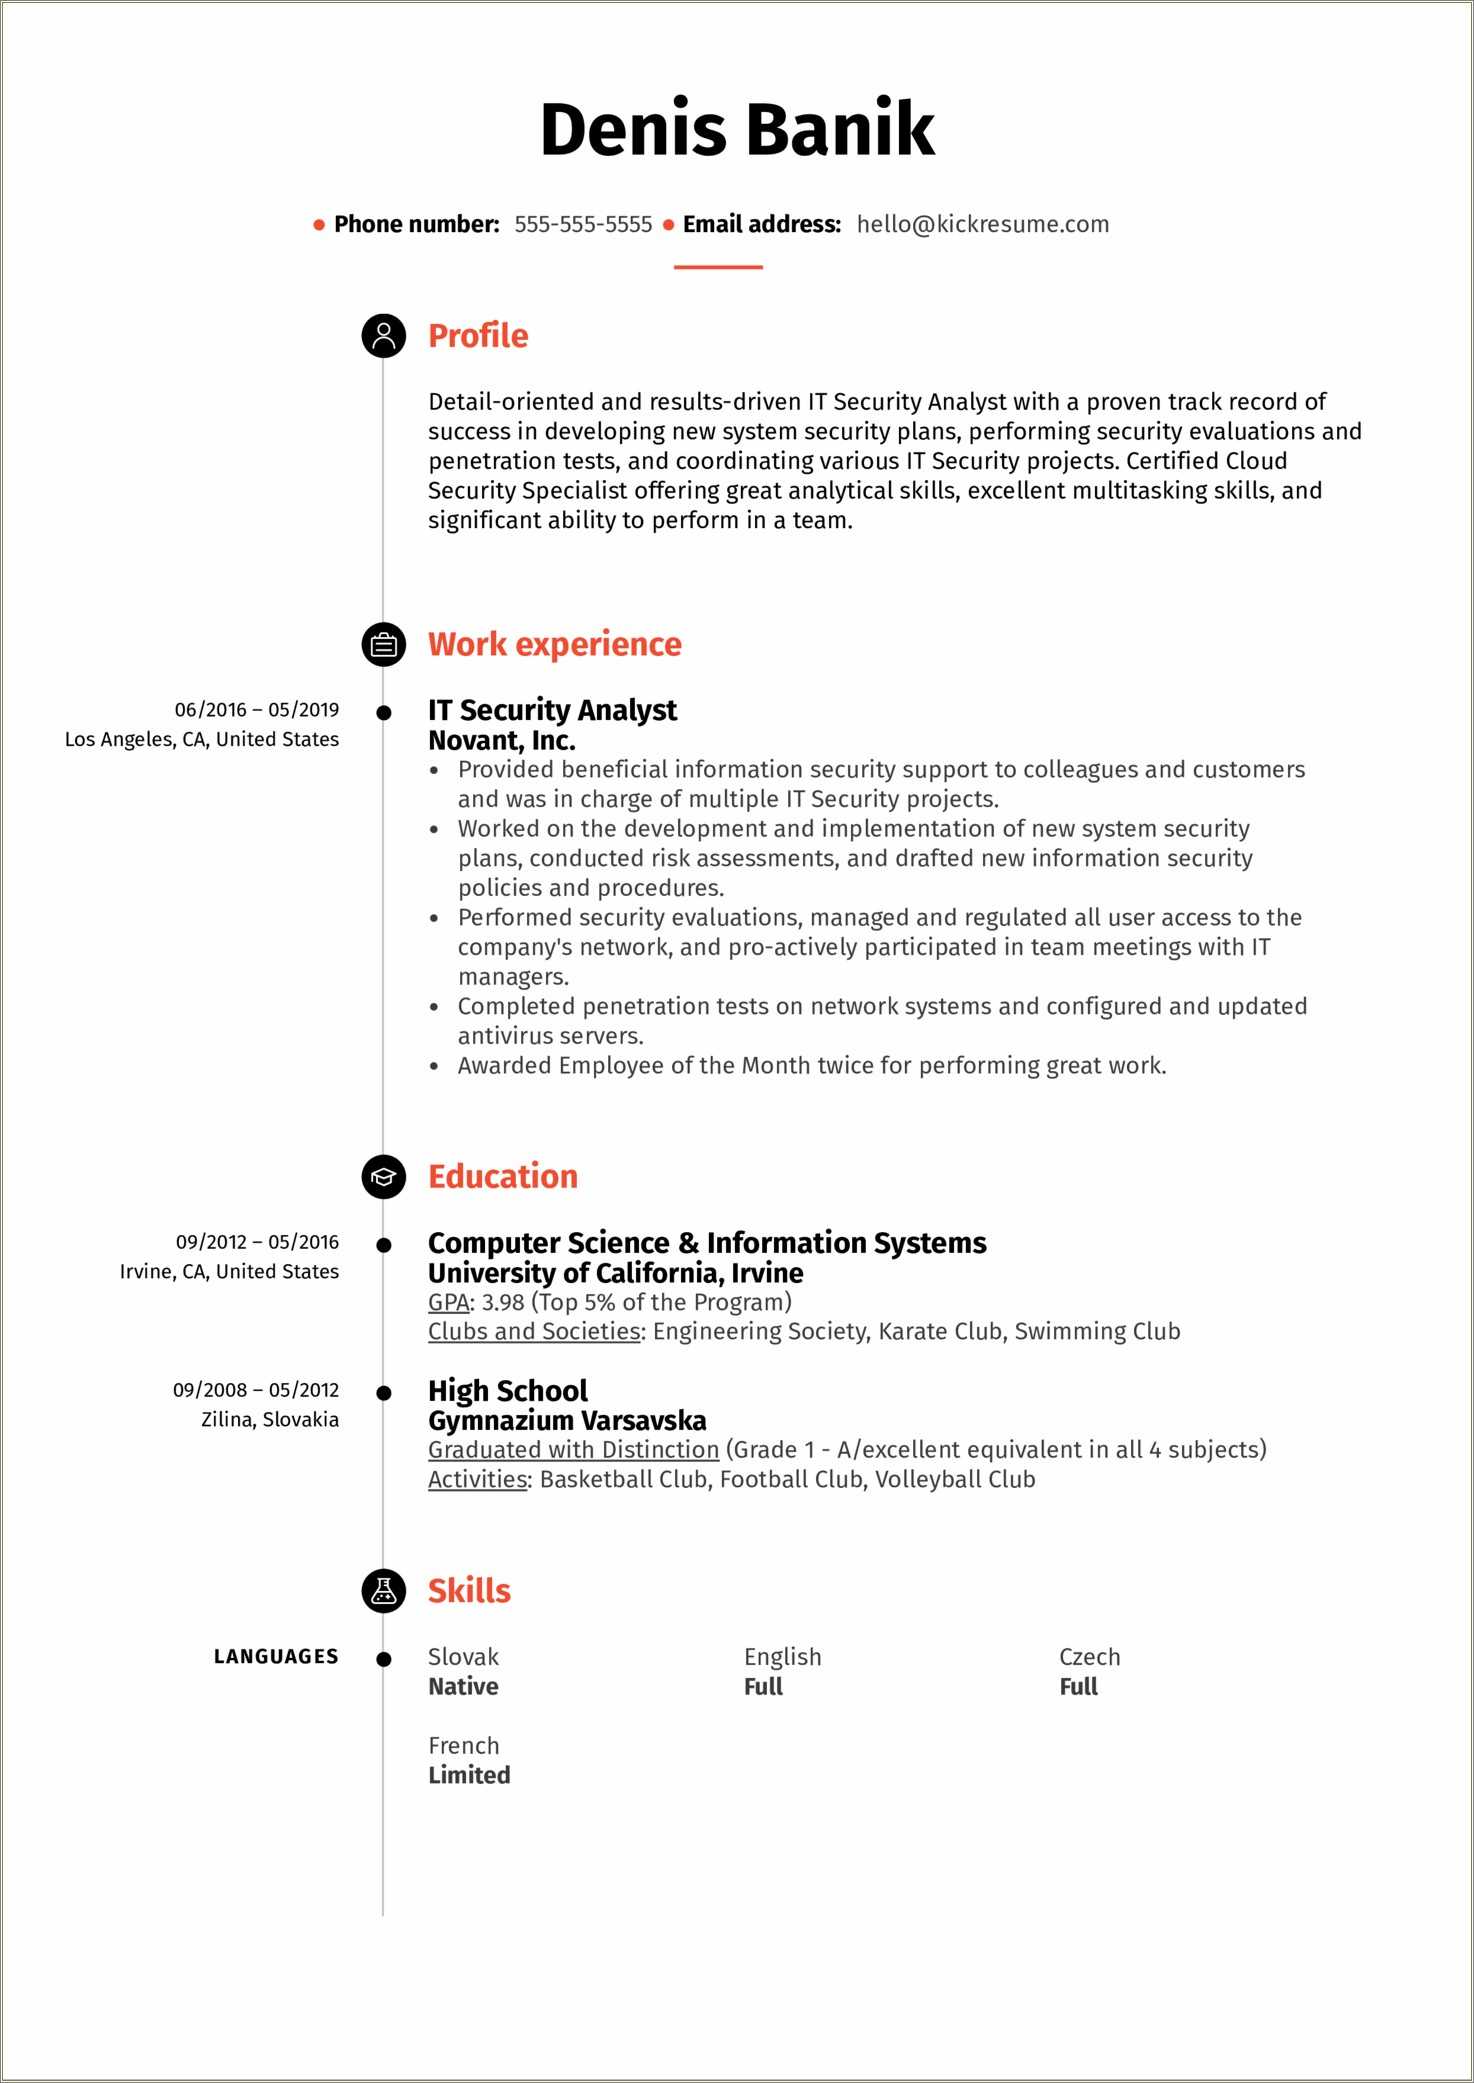 Cyber Security Analyst Objective Resume